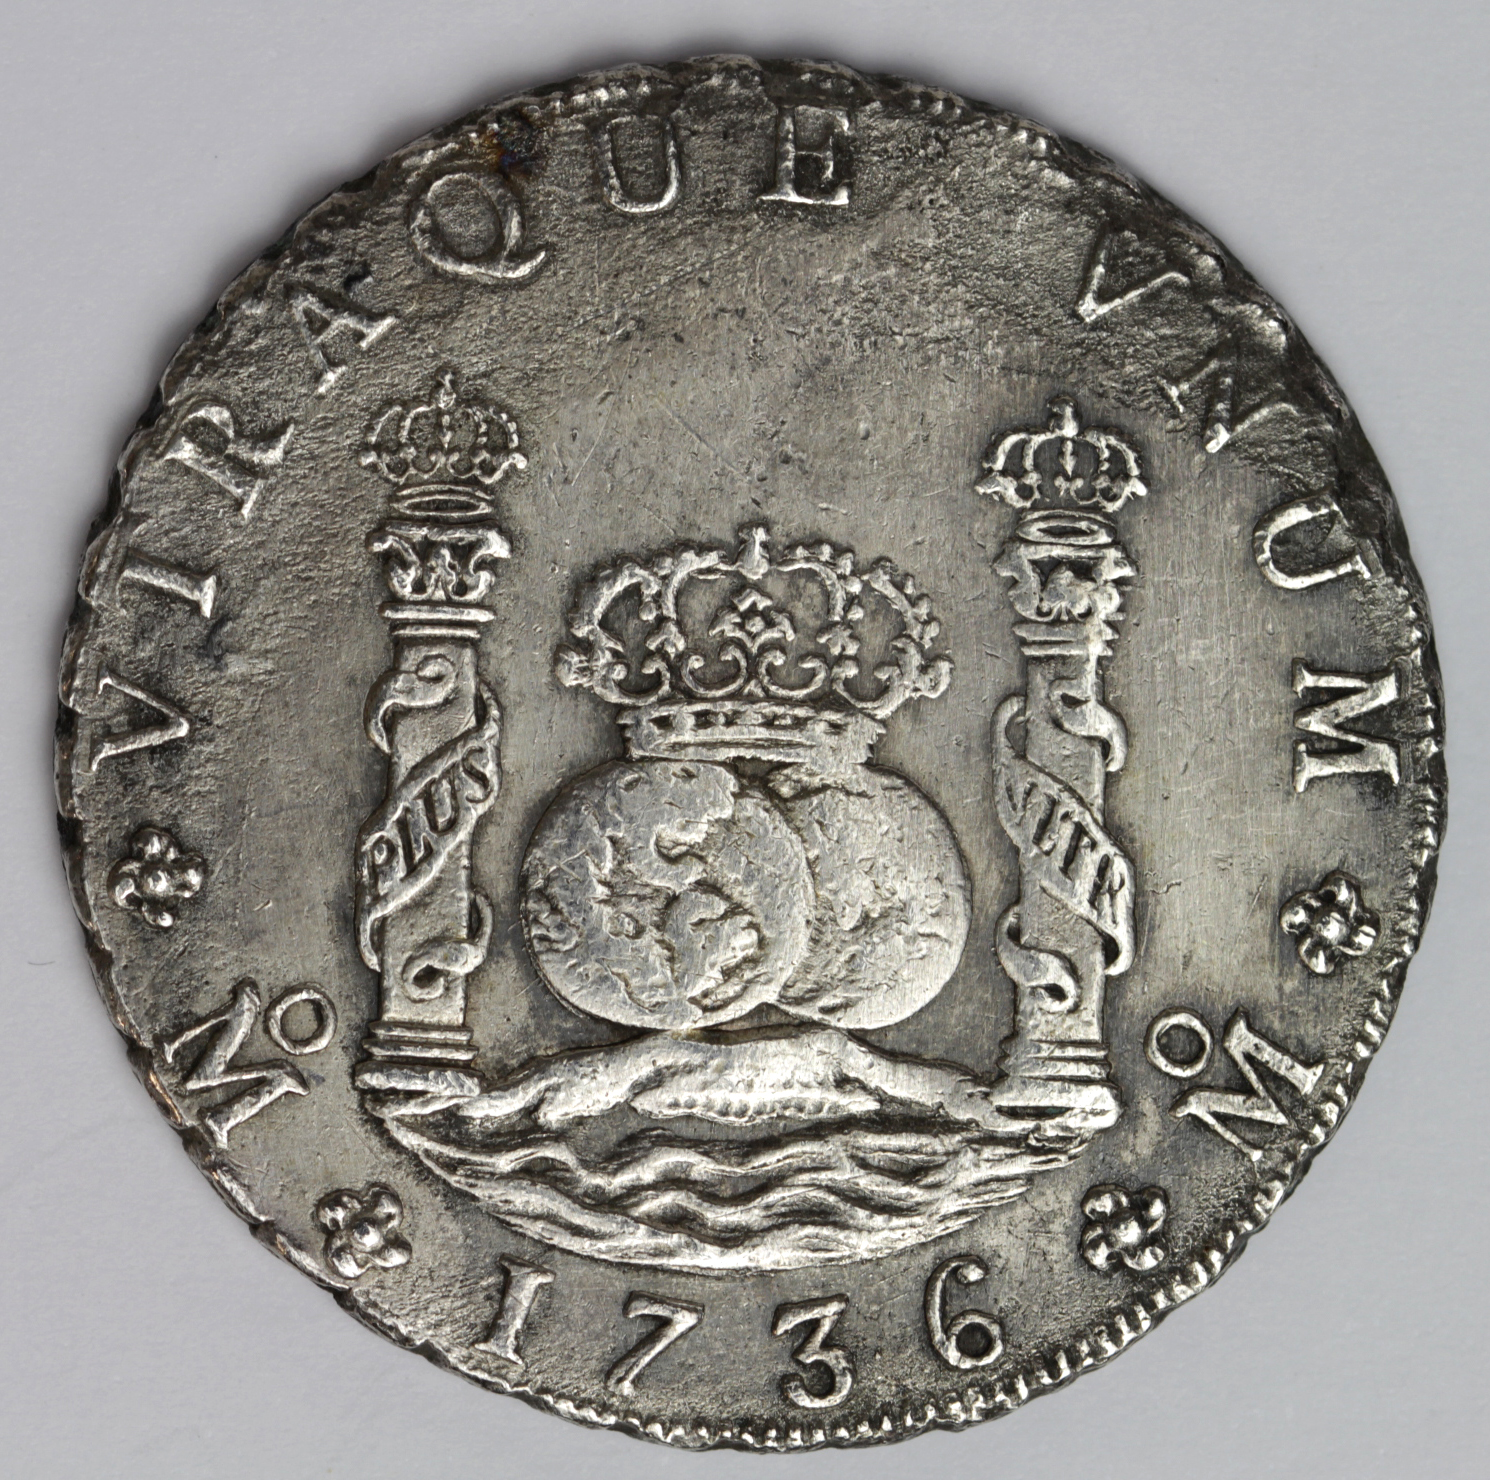 Spanish Mexico silver 8 Reales 1736 Mo MF, KM# 103, VF with heavy water damage on reverse (shipwreck